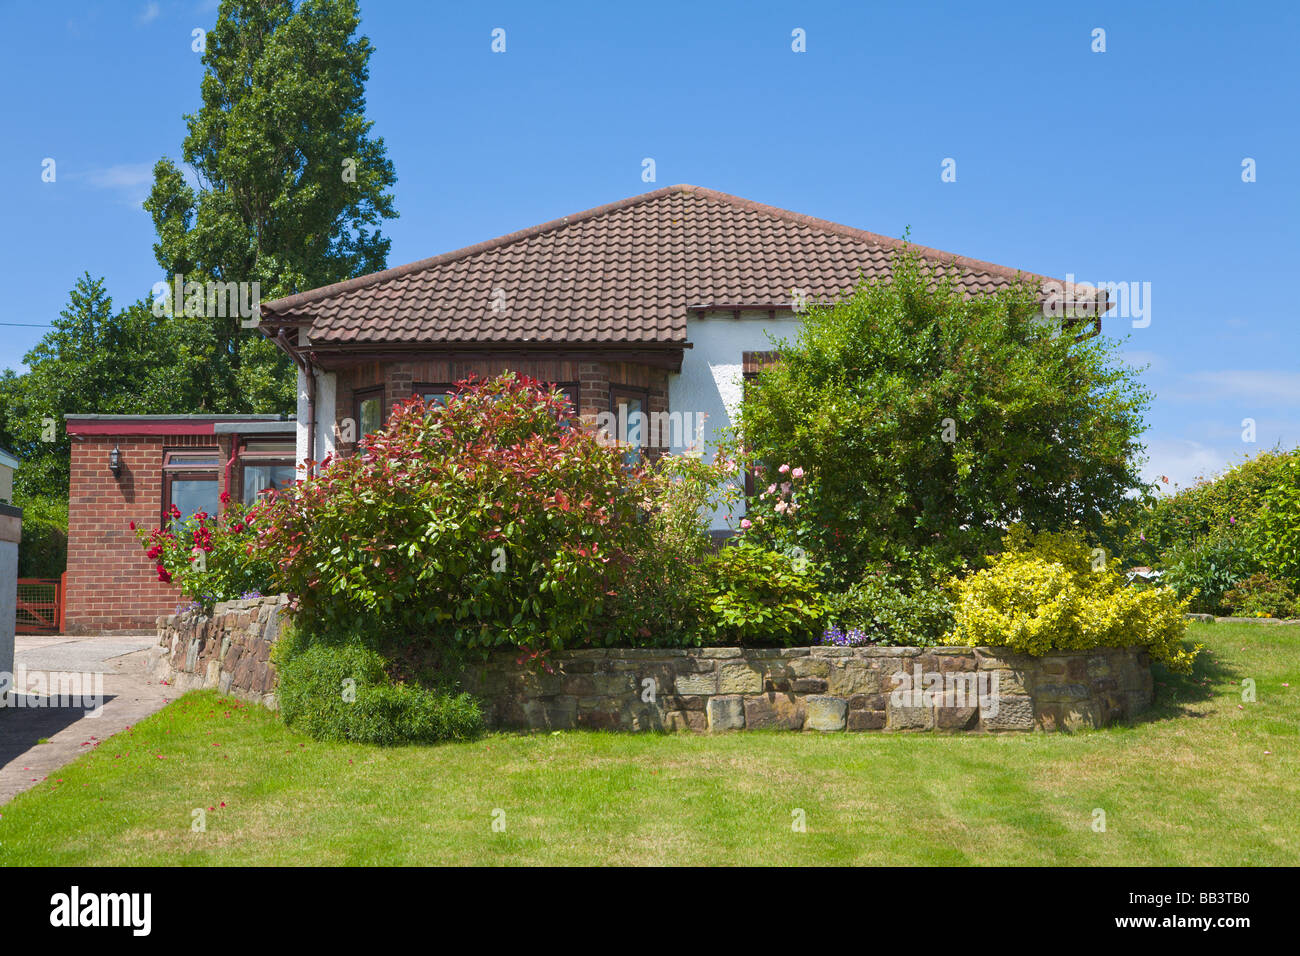 Terraced border of shrubs in garden and bungalow Stock Photo